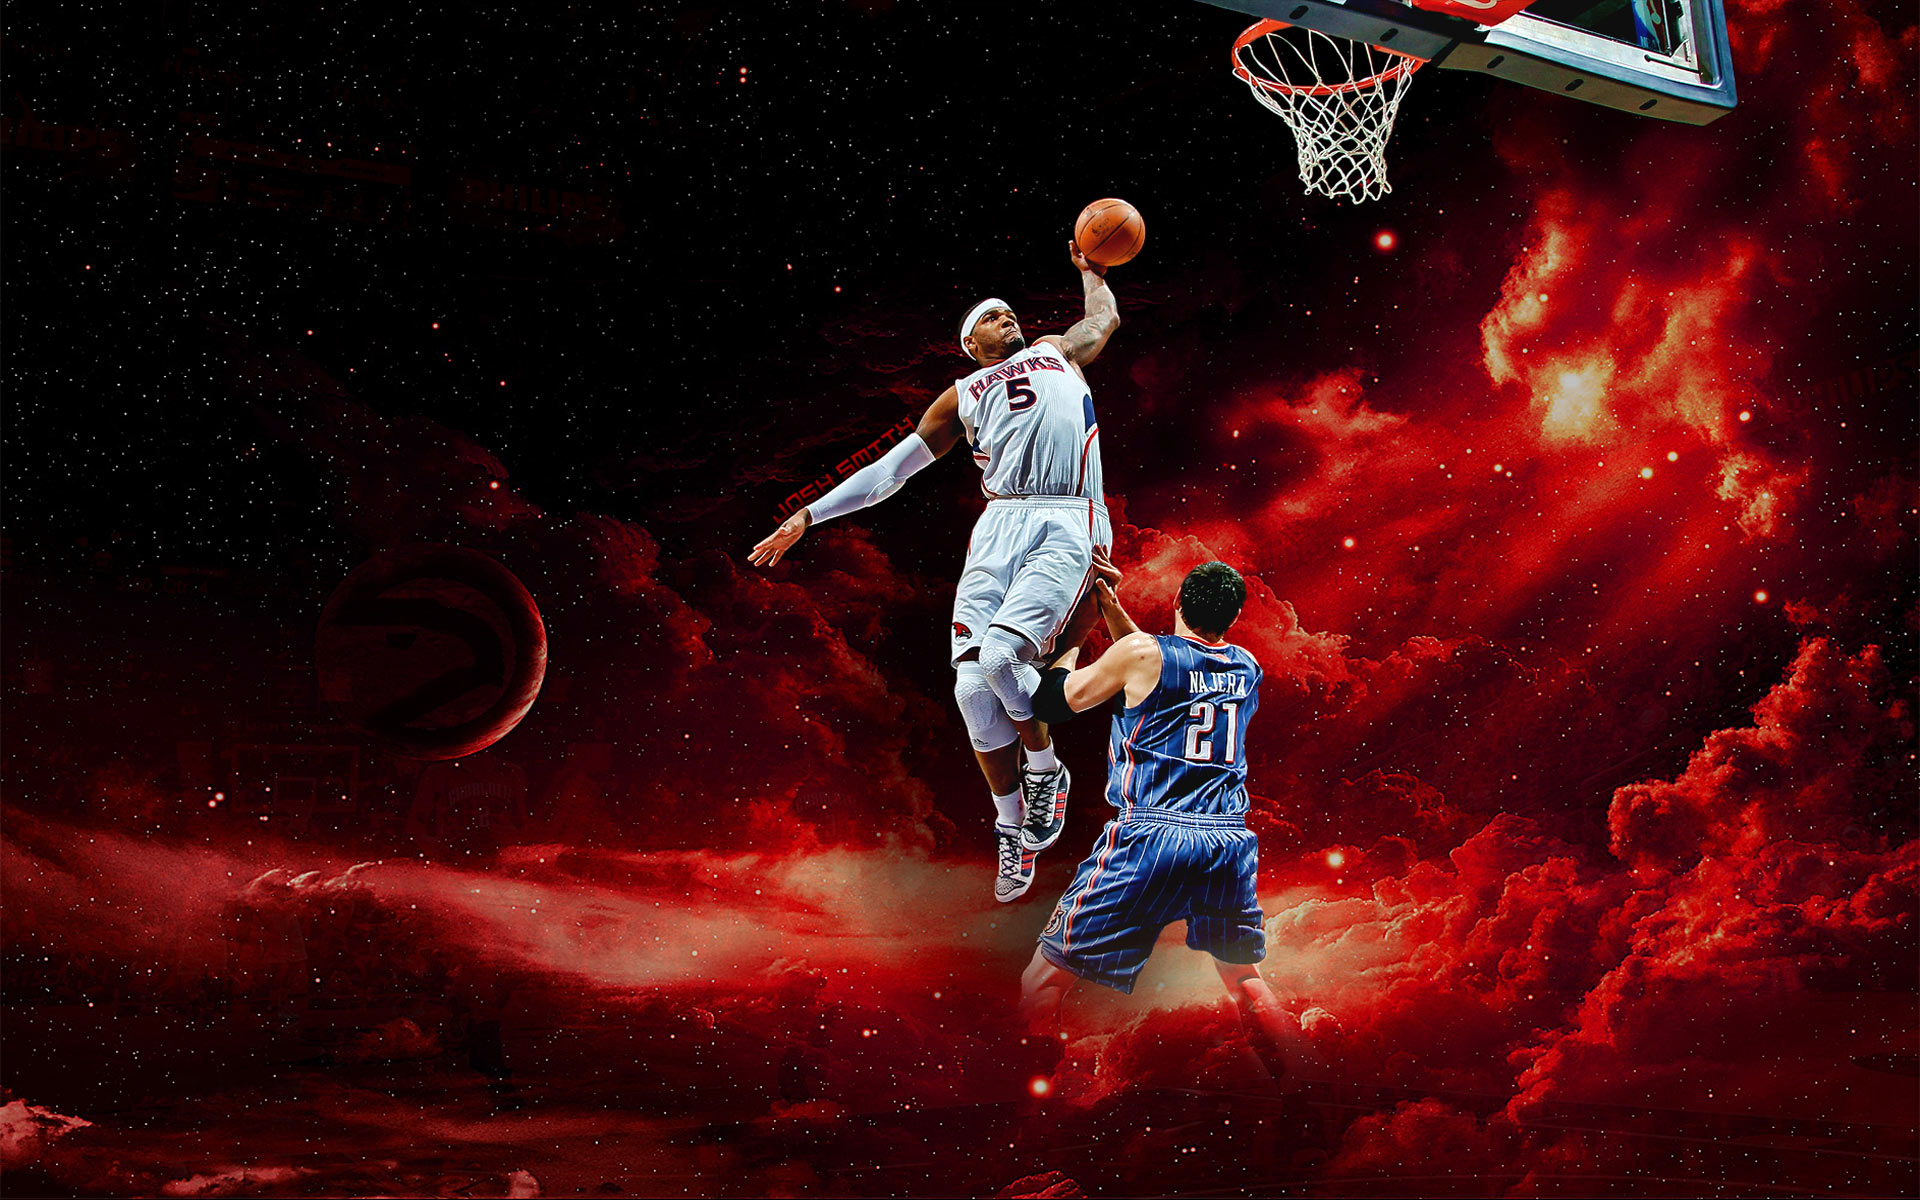 Giannis antetokounmpo and dunk 4K wallpaper download